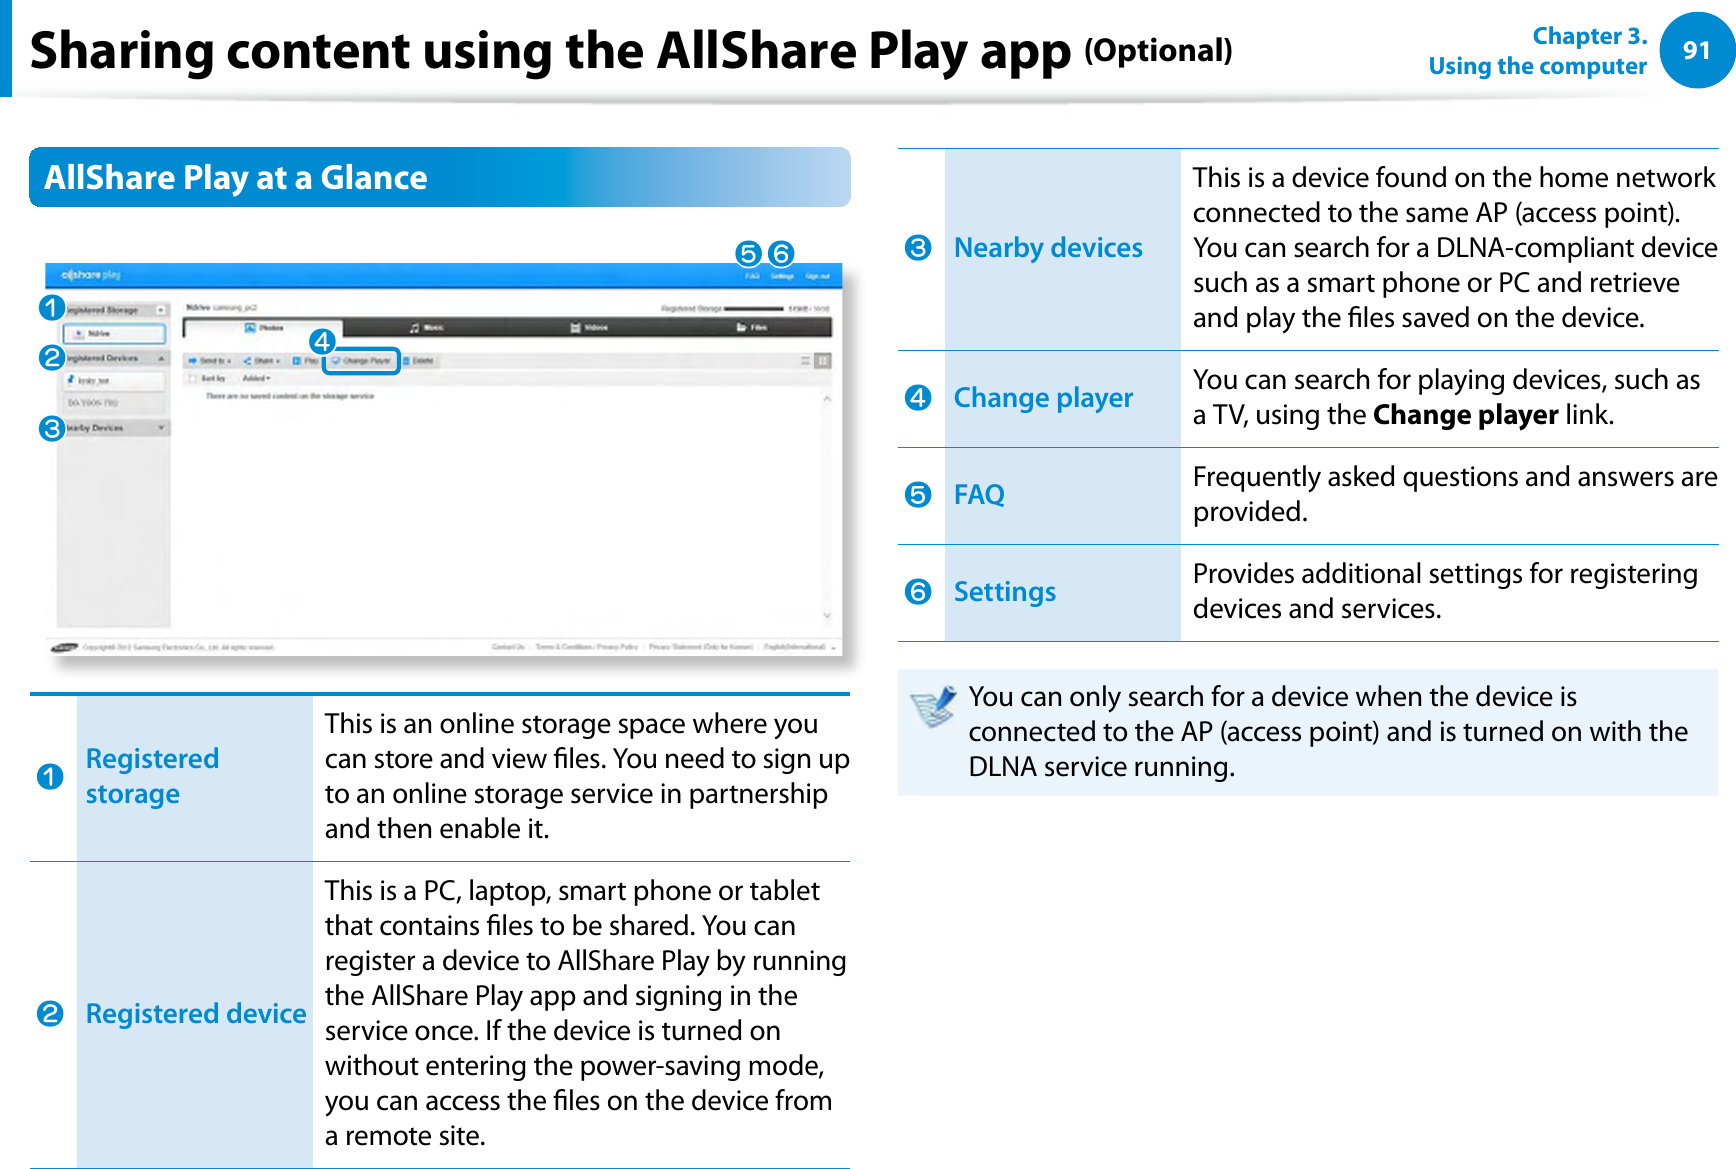 91Chapter 3.  Using the computerSharing content using the AllShare Play app (Optional)AllShare Play at a GlancenlWjVbnRegistered storageThis is an online storage space where you can store and view les. You need to sign up to an online storage service in partnership and then enable it.lRegistered deviceThis is a PC, laptop, smart phone or tablet that contains les to be shared. You can register a device to AllShare Play by running the AllShare Play app and signing in the service once. If the device is turned on without entering the power-saving mode, you can access the les on the device from a remote site.WNearby devices This is a device found on the home network connected to the same AP (access point). You can search for a DLNA-compliant device such as a smart phone or PC and retrieve and play the les saved on the device.jChange player You can search for playing devices, such as a TV, using the Change player link.VFAQFrequently asked questions and answers are provided.bSettings Provides additional settings for registering devices and services. You can only search for a device when the device is connected to the AP (access point) and is turned on with the DLNA service running.